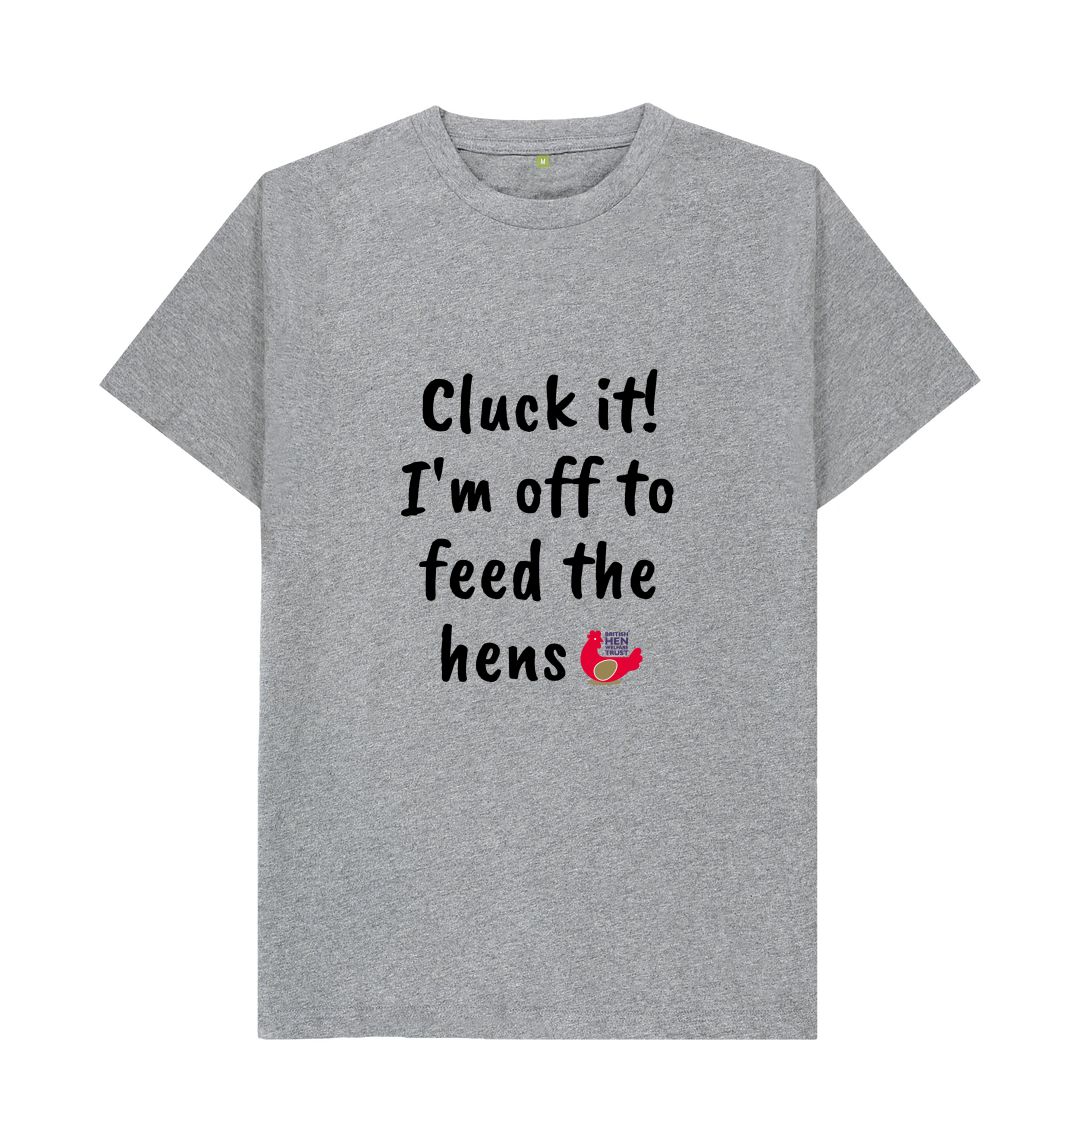 Athletic Grey Cluck it! I'm off to feed the hens Unisex T-shirt